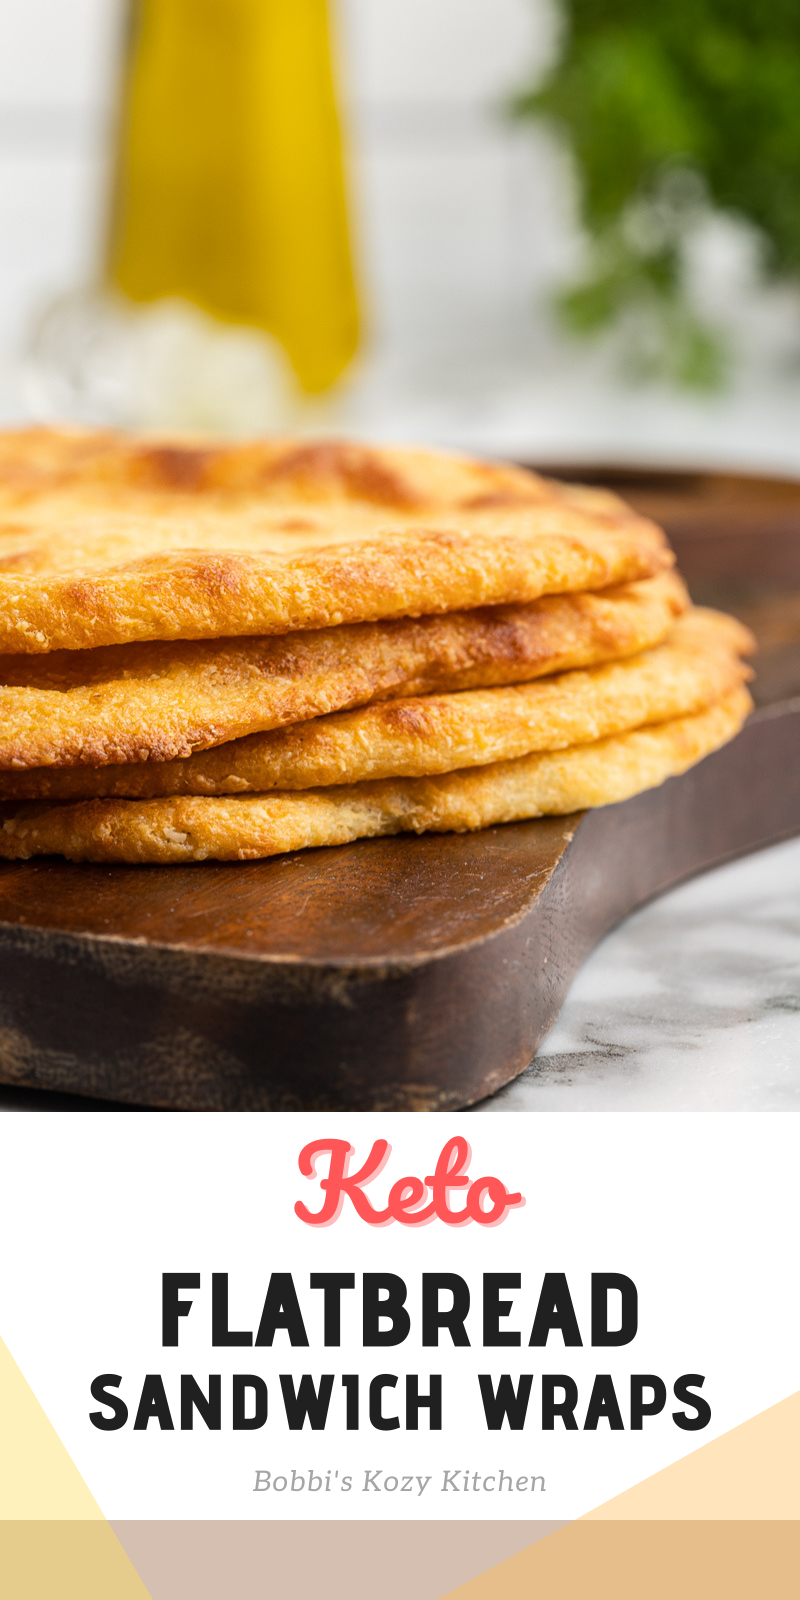 Keto Flatbread (Sandwich Wraps) - This soft and chewy Keto flatbread is a low carb alternative for pita, bread, pizza base, and more.  #keto #lowcarb #glutenfree #sugarfree #flatbread #sandwich #wrap #bread #fathead